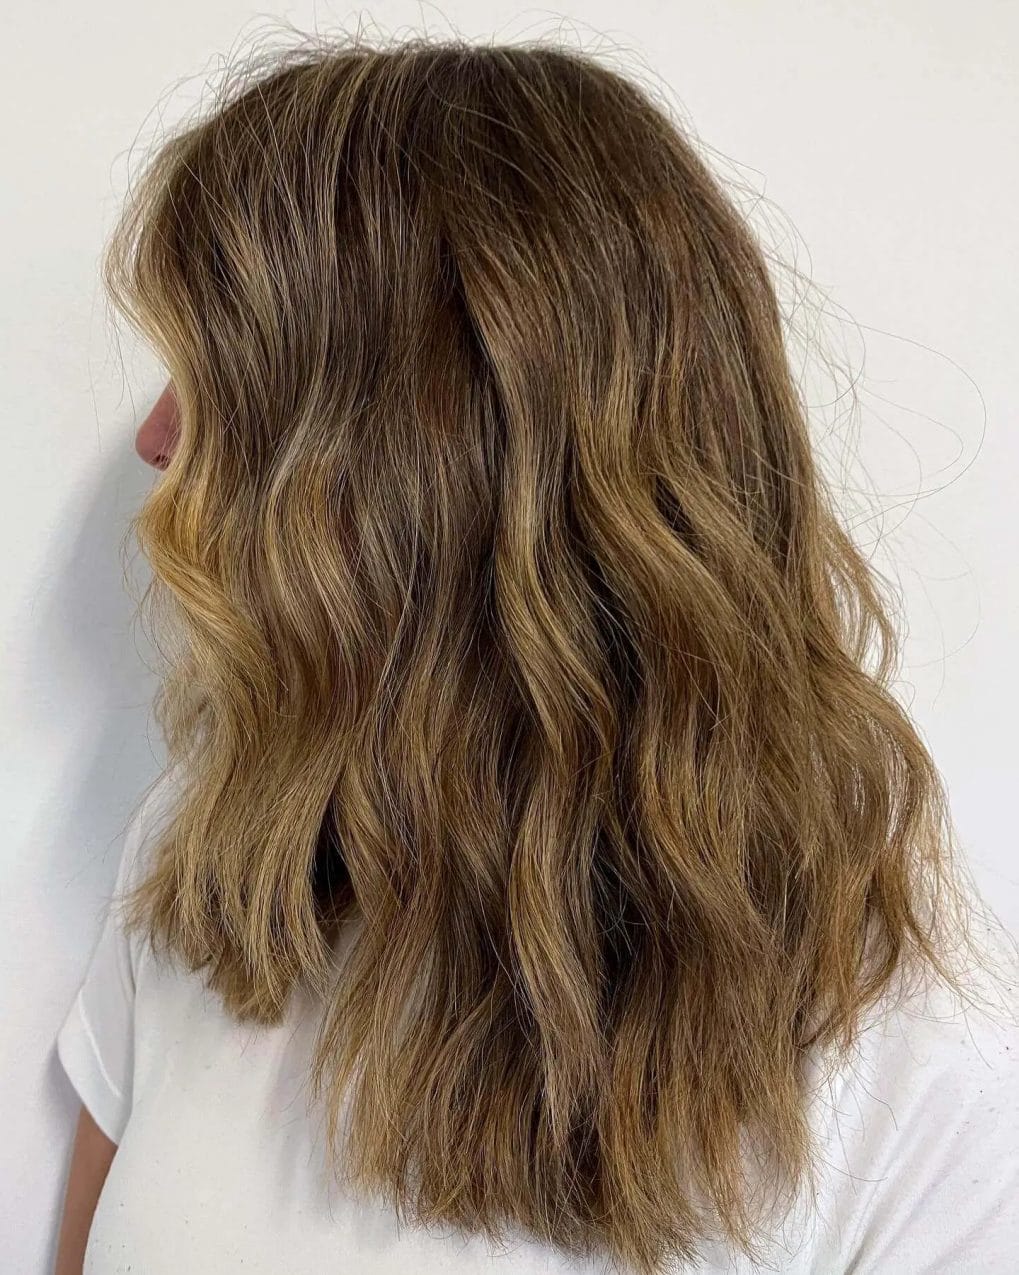 Mid-length cut with warm honey tones and soft waves on hair.